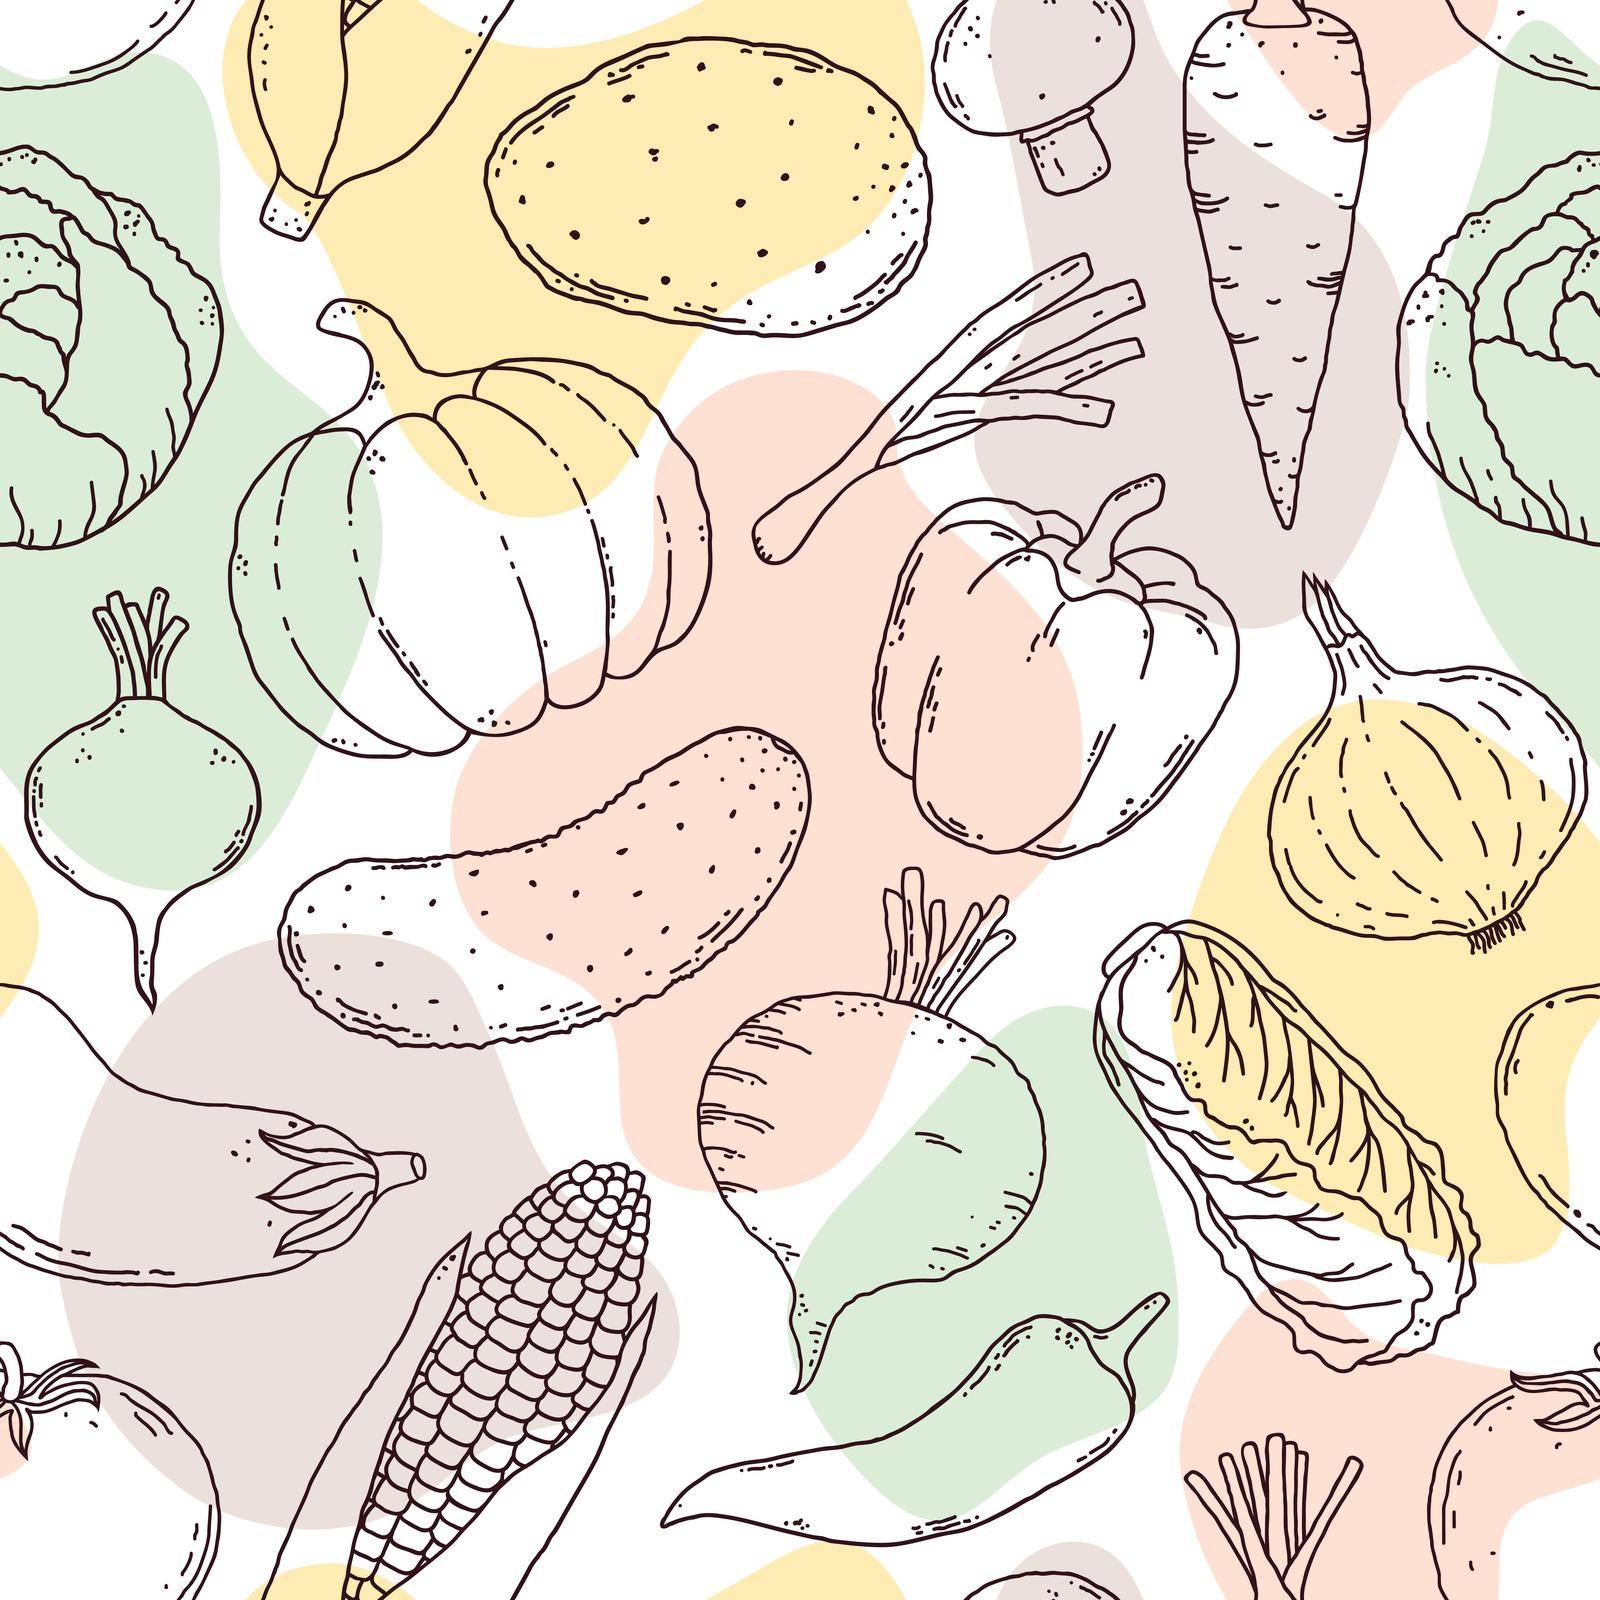 Seamless pattern with hand drawn vegetables and abstrac light shapes